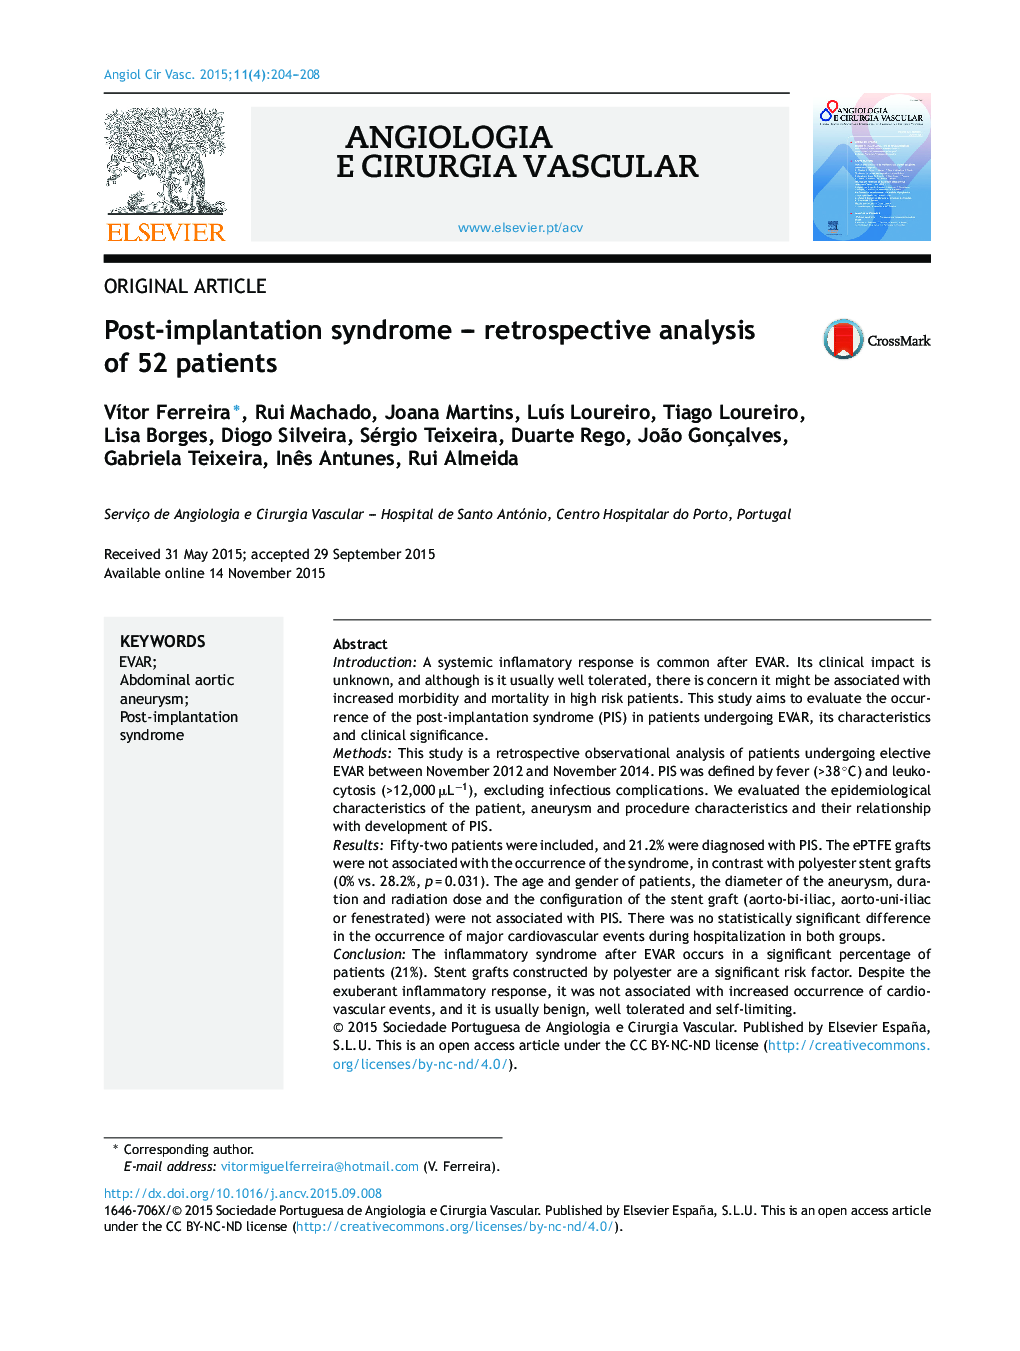 Post-implantation syndrome – retrospective analysis of 52 patients